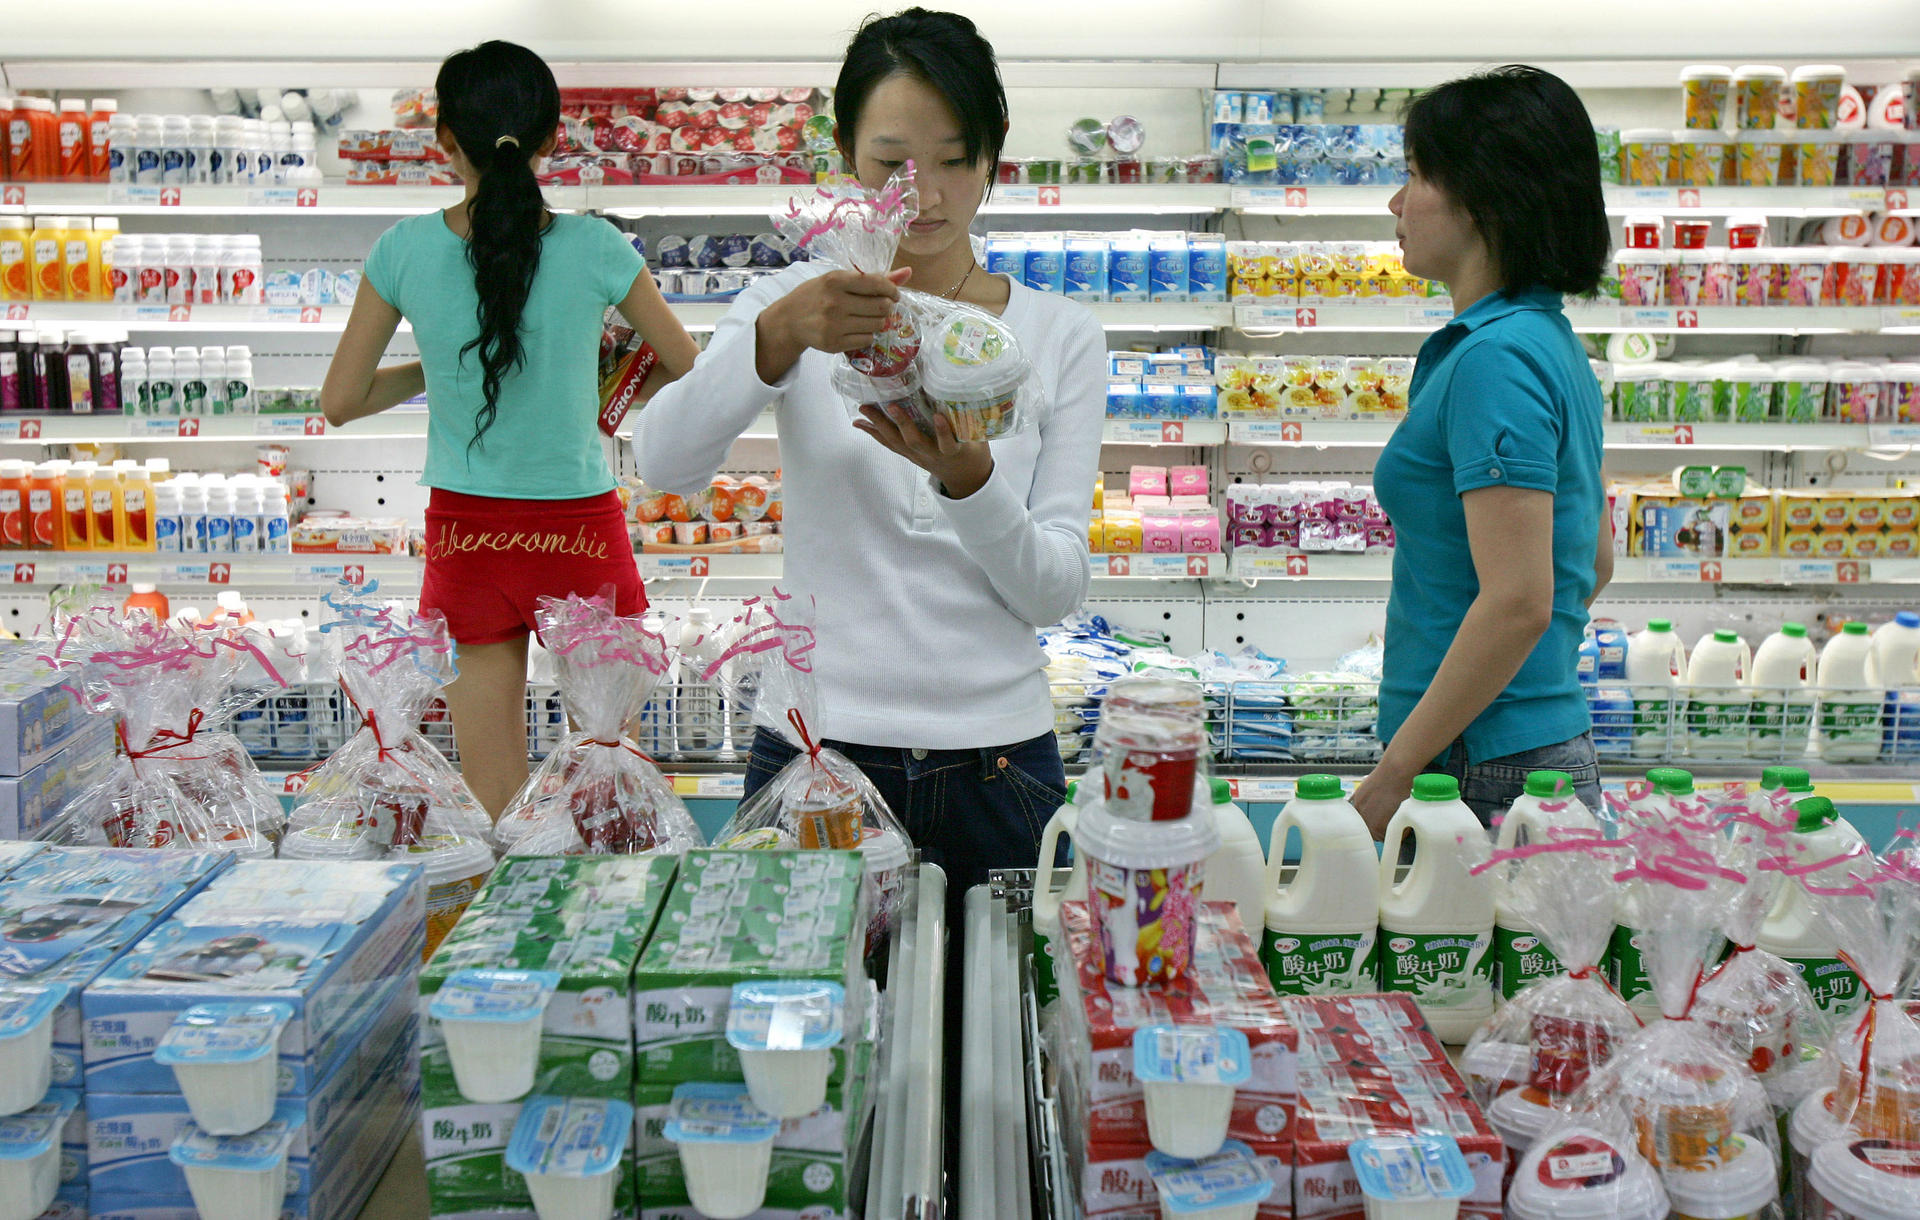 A Beijing shopper examines milk from China Mengniu Dairy, the main client for China Modern Dairy's raw milk. Photo: Bloomberg